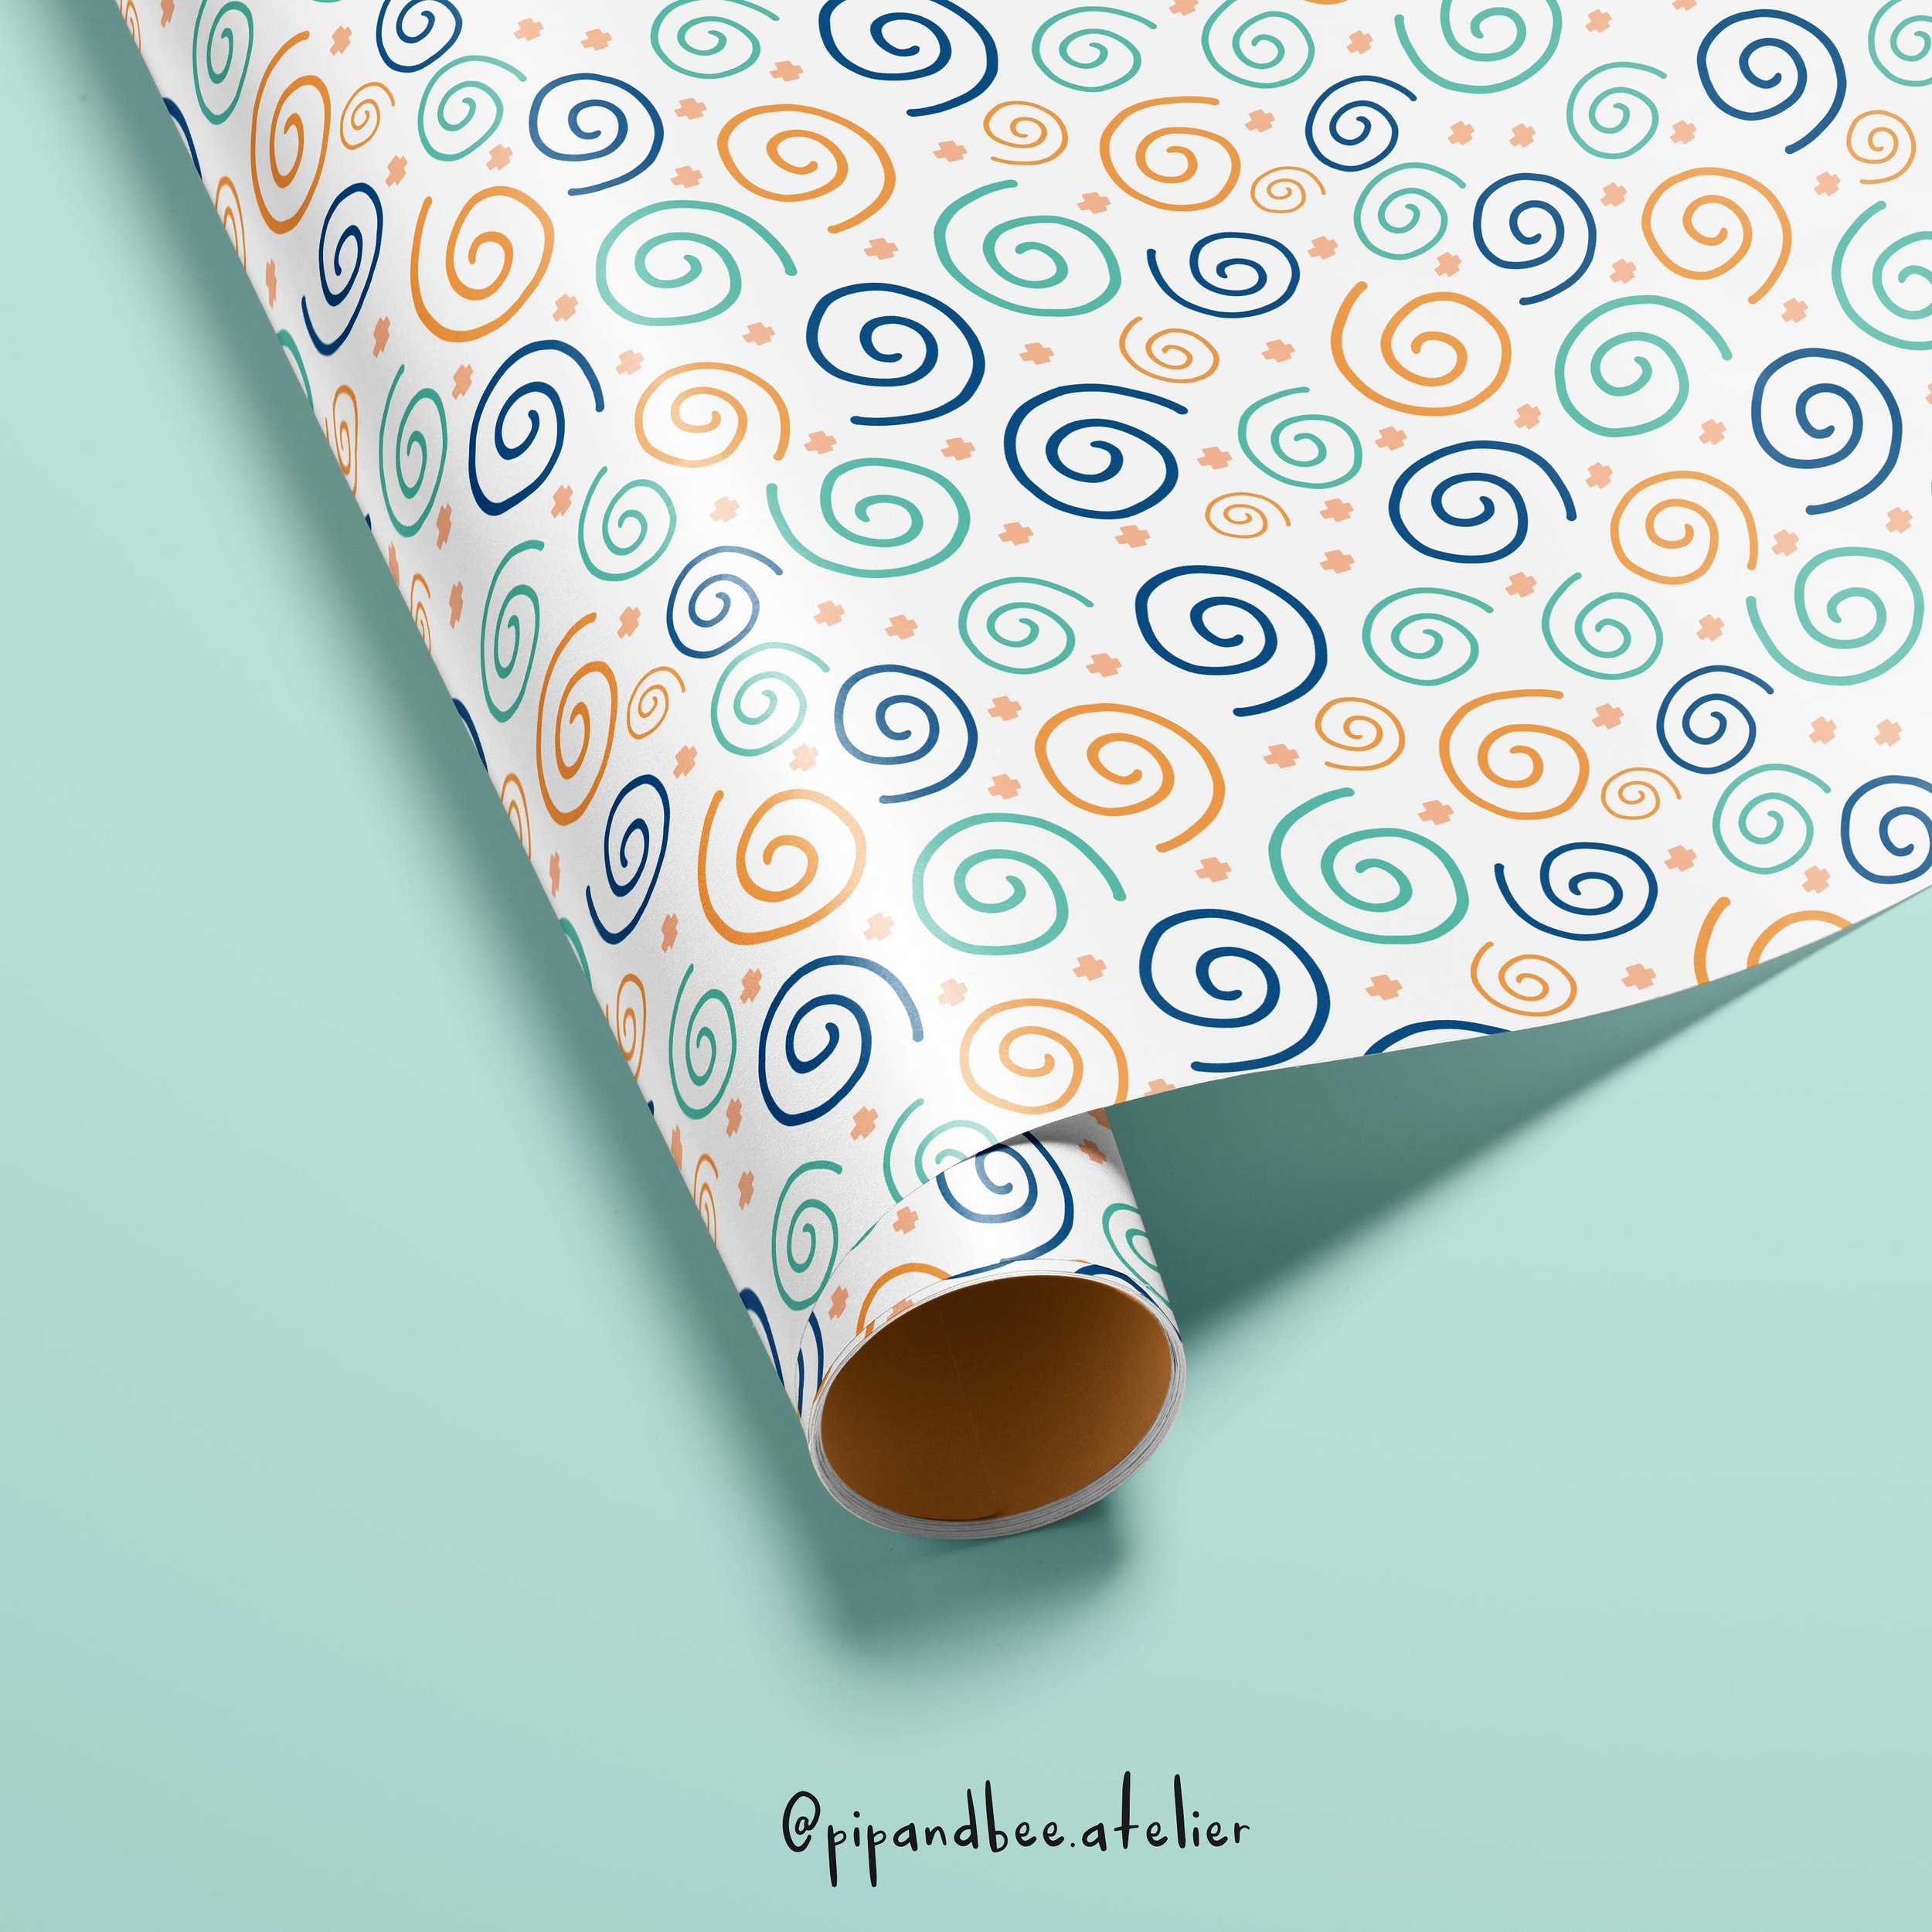 And here&rsquo;s my crazy swirl pattern on wrapping paper! Wouldn&rsquo;t it be perfect to wrap birthday gifts! 🎁 

#crazyswirls #swirl #patternlife #wrappingpaper #stationery #weappingpaperdesign #stationerygoods #stationerydesign #funpattern #cute